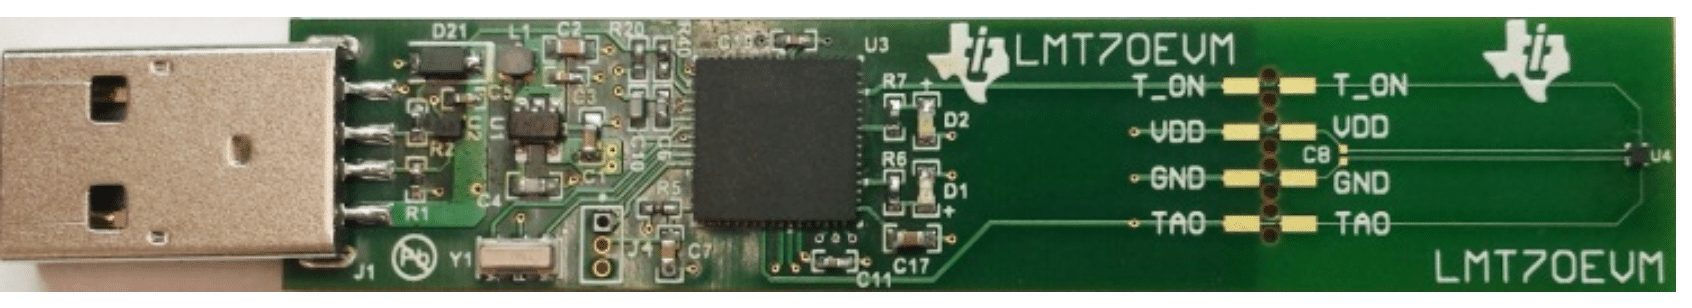 Temperature Sensor For Wearable Devices Reference Design